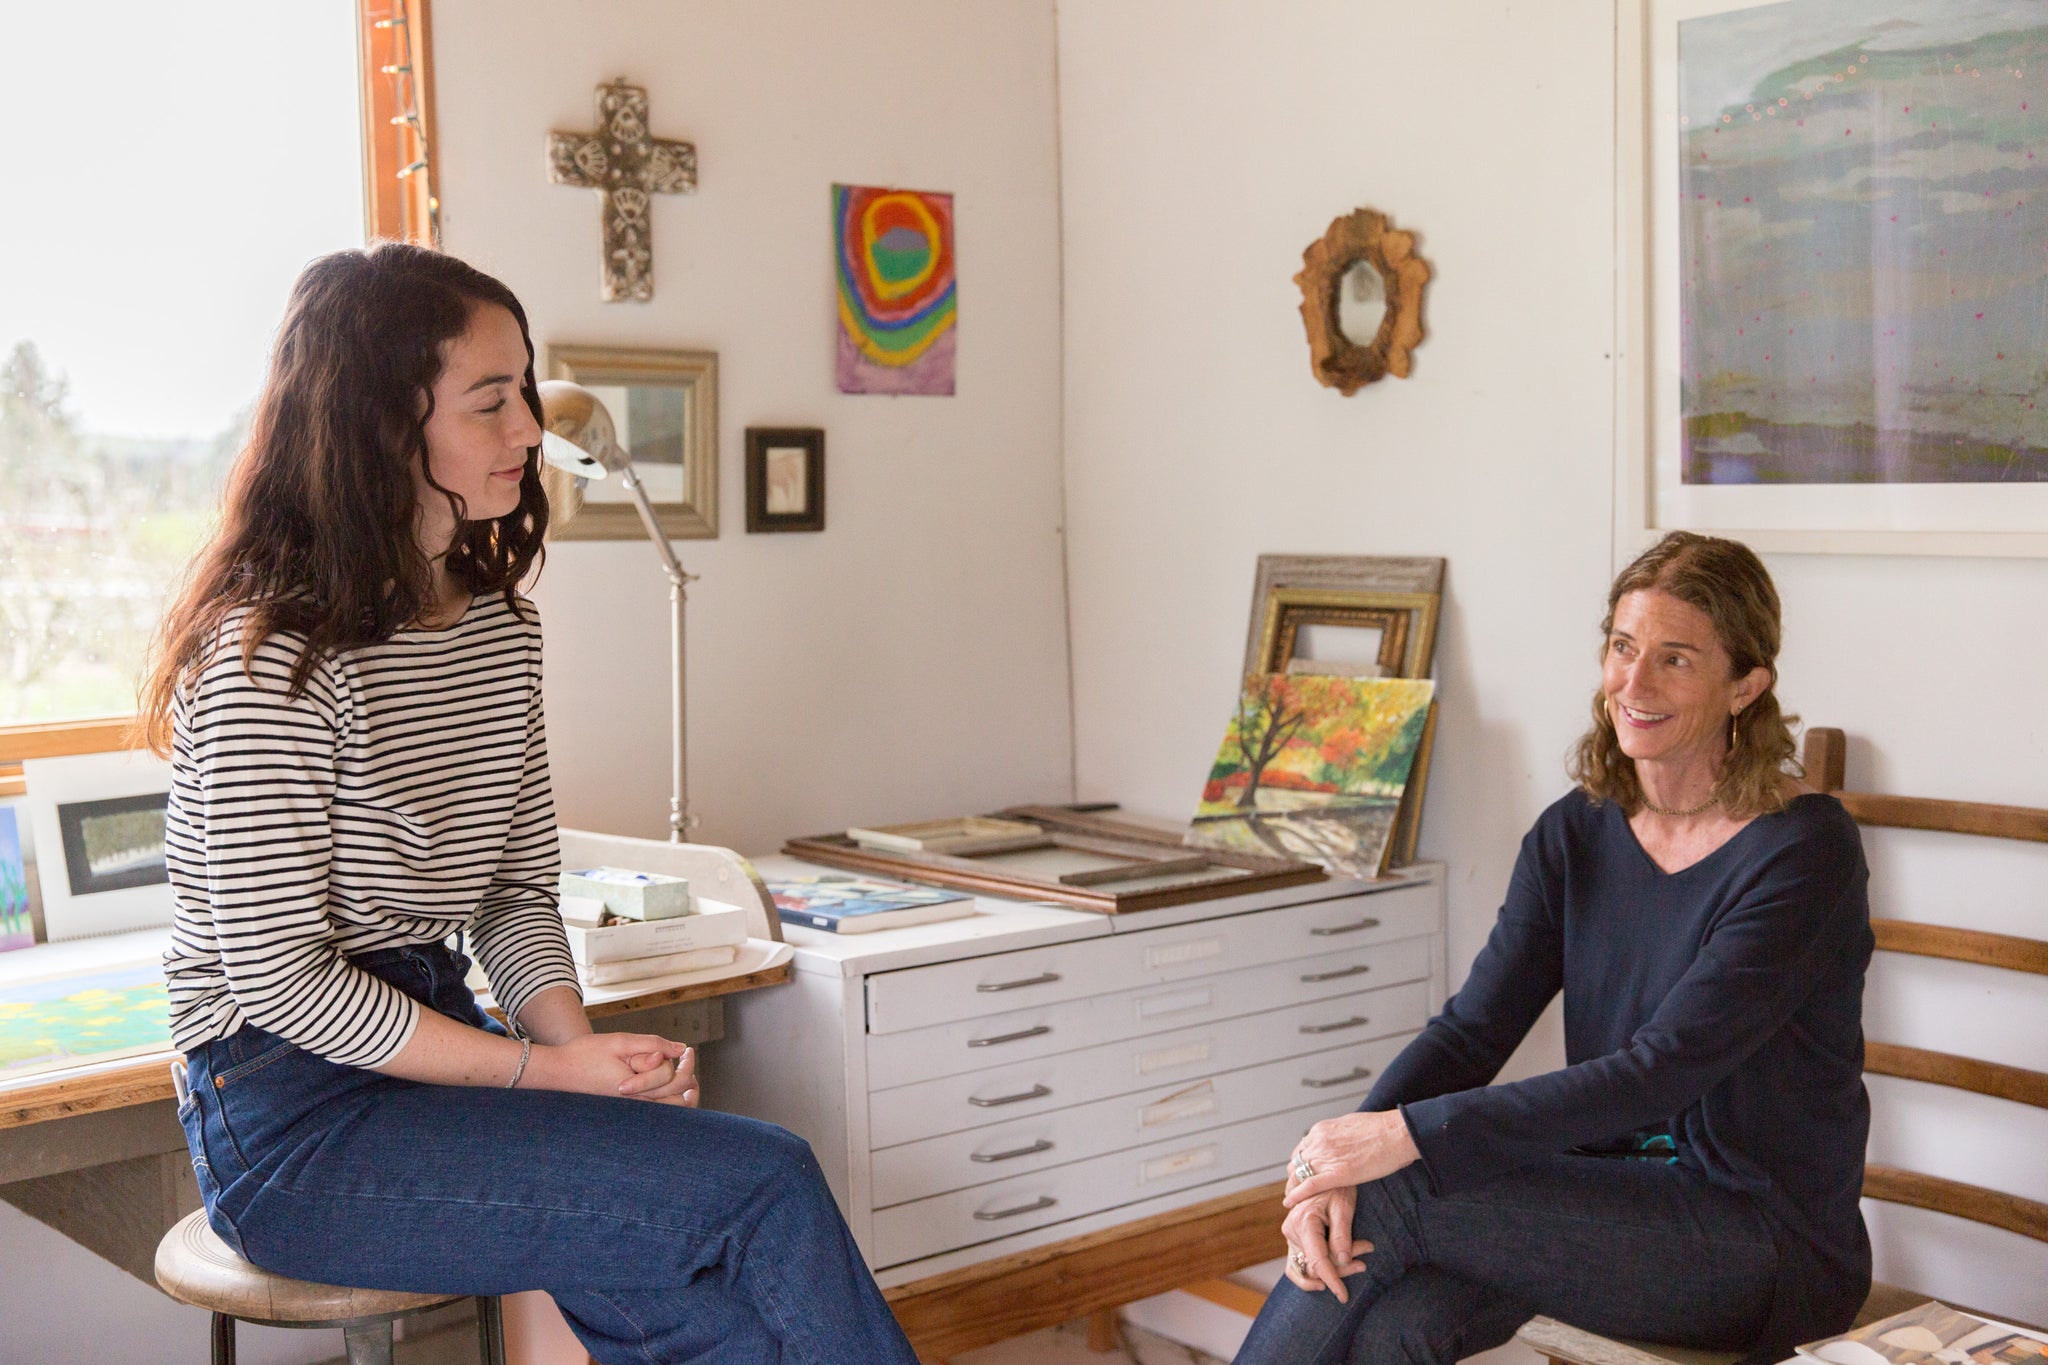 artist, Kate Blakeslee, and daughter, Cecilia Payne, in conversation